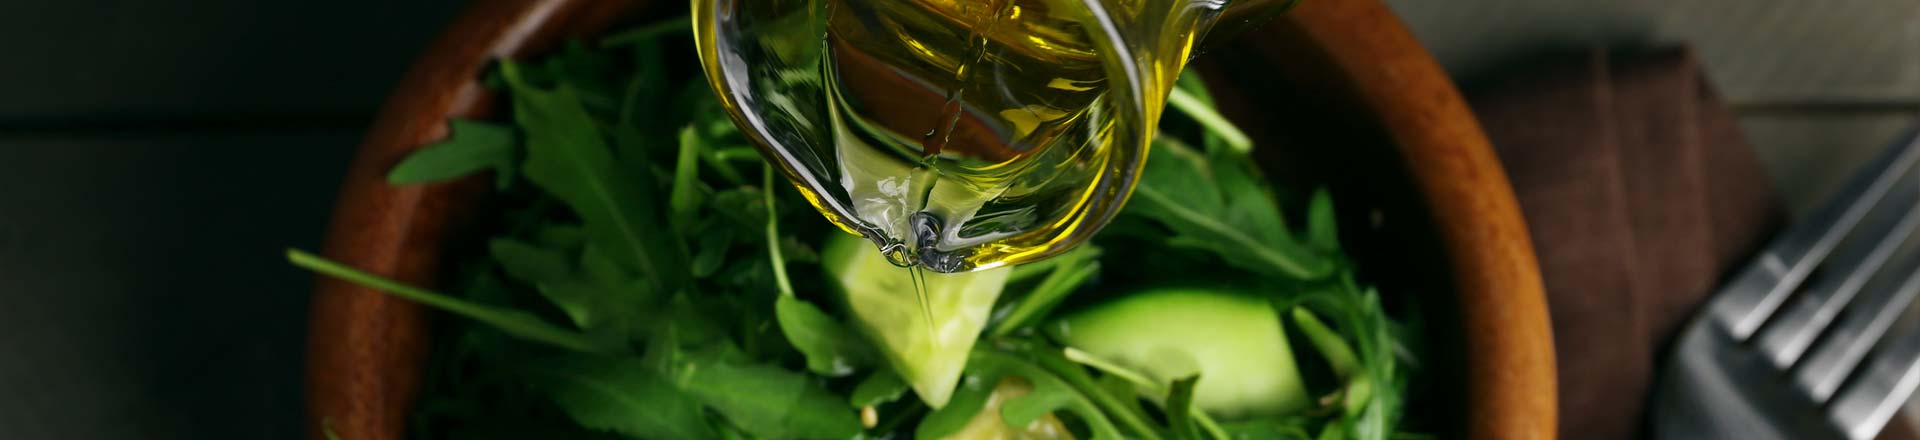 salad and extra virgin olive oil dressing recipes